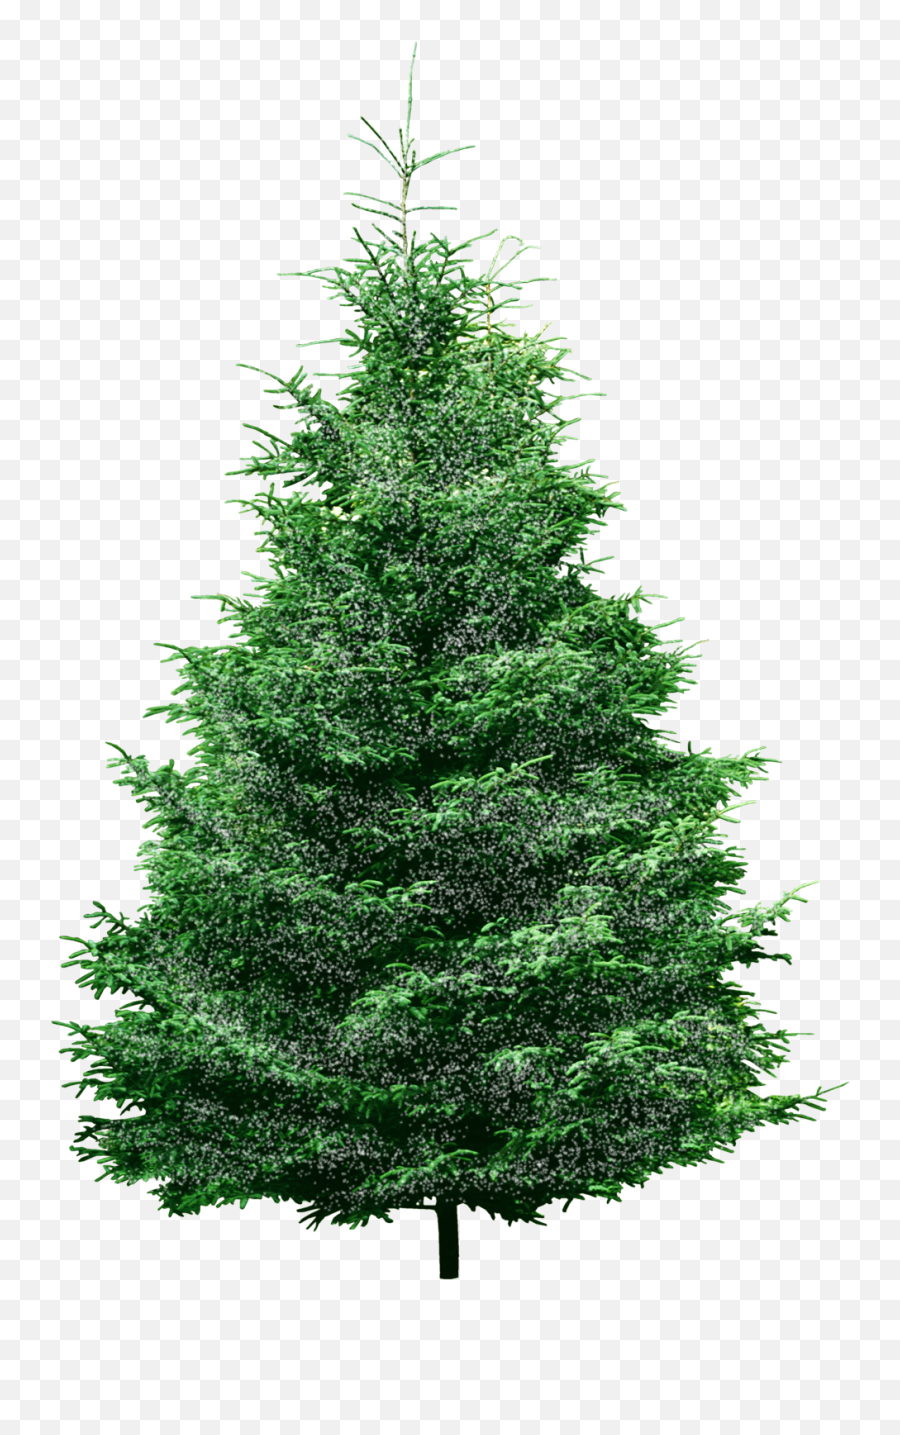 Spruce - Tree U2013 Sweet Pea Machine Embroidery Designs Transparent Background Pine Tree Transparent Clipart Png,Spruce Tree Png